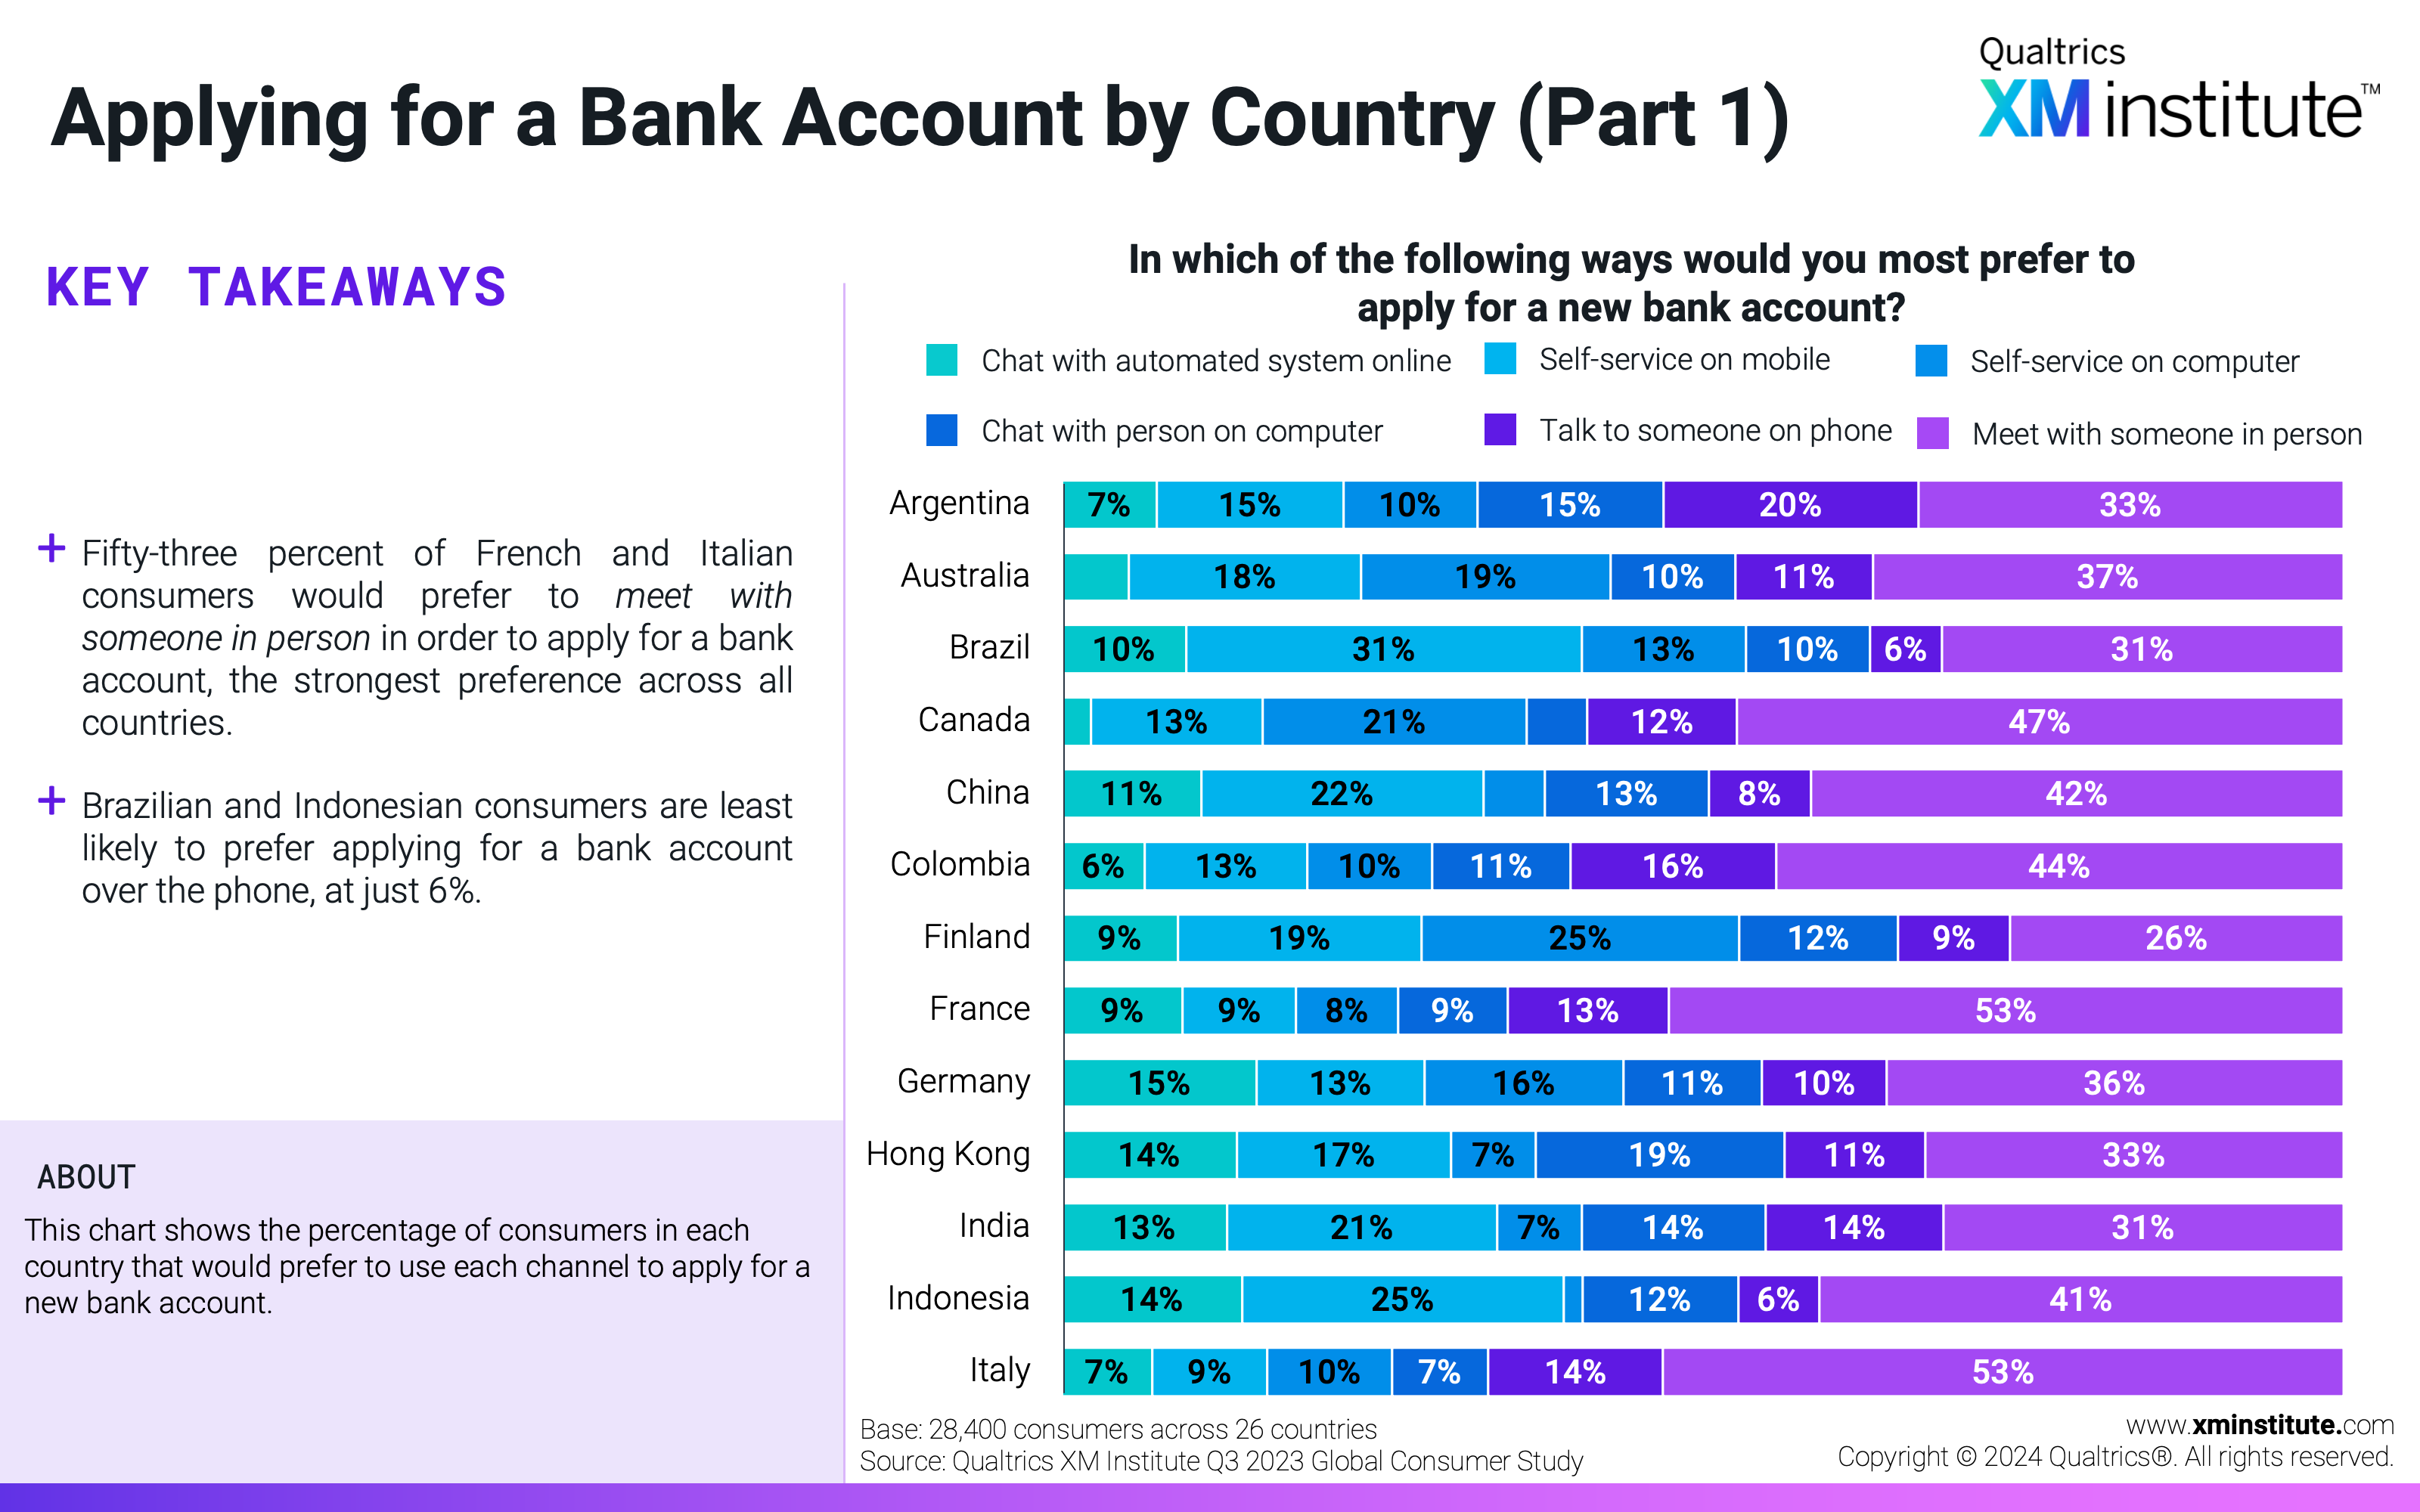 This chart shows the percentage of consumers in each country that would prefer to use each channel to apply for a new bank account. 